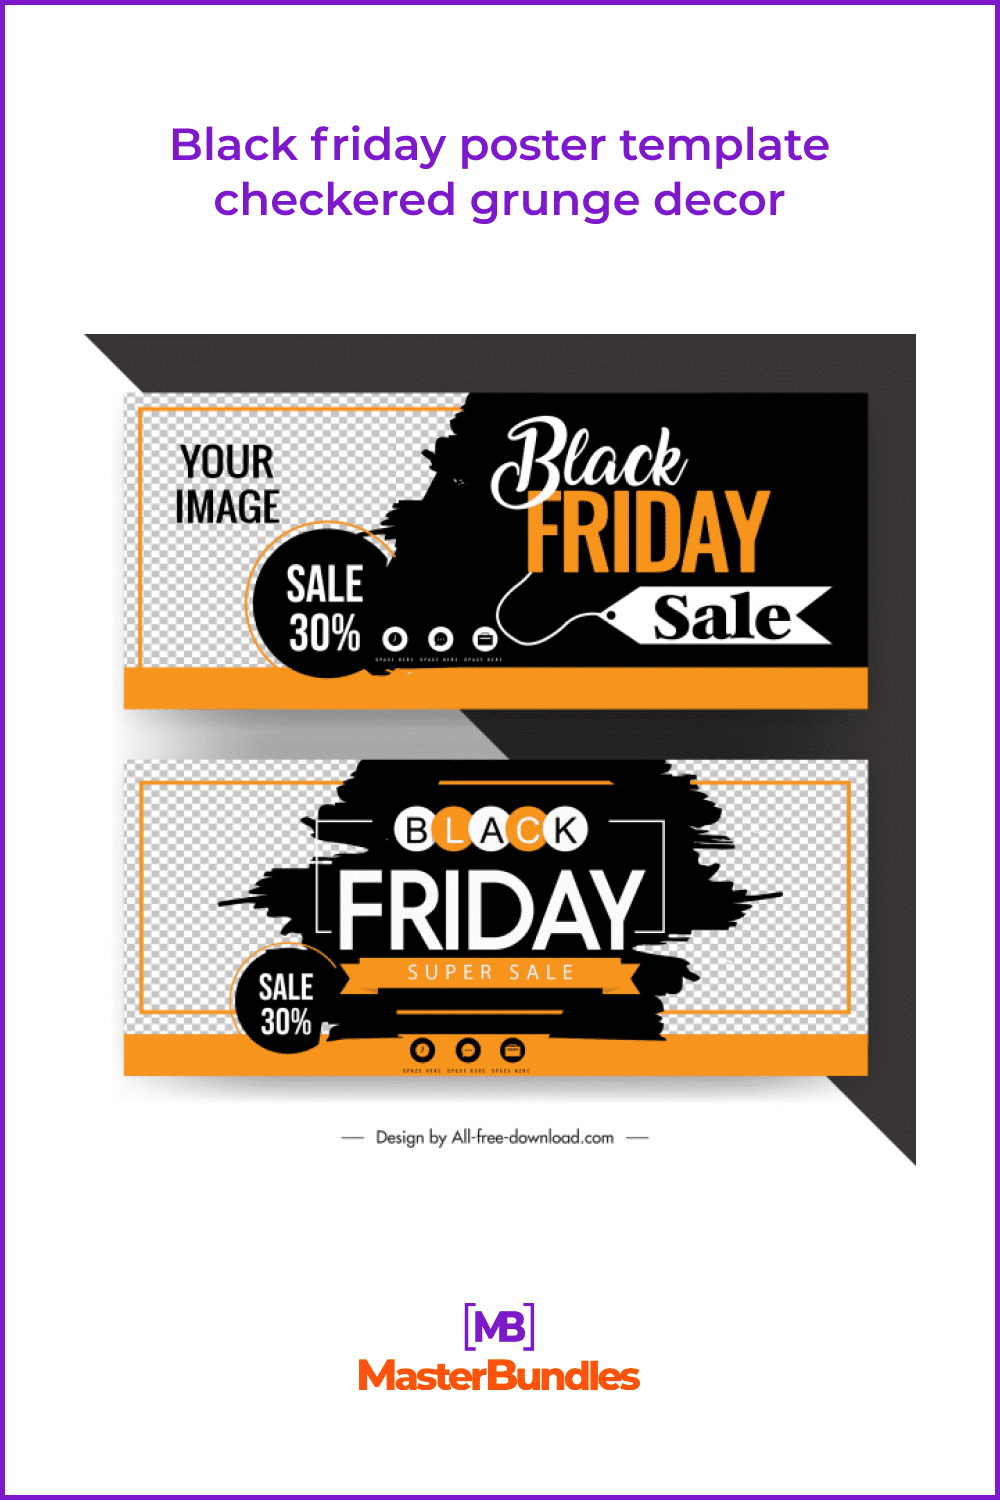 Checkered Grunge Black Friday Poster with Black and Yellow Colors.